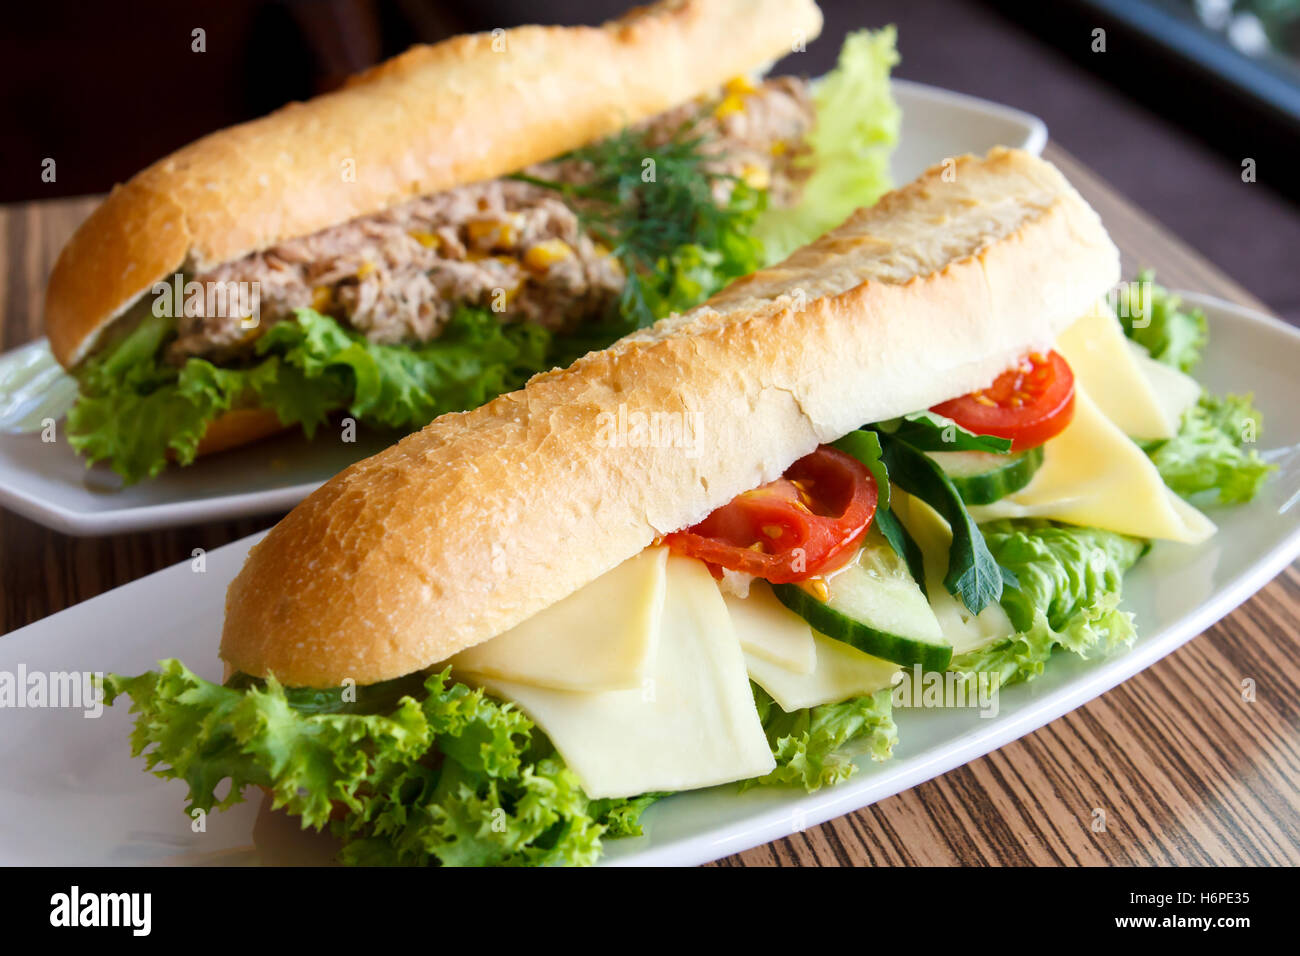 Baguette Cafe High Resolution Stock Photography and Images - Alamy